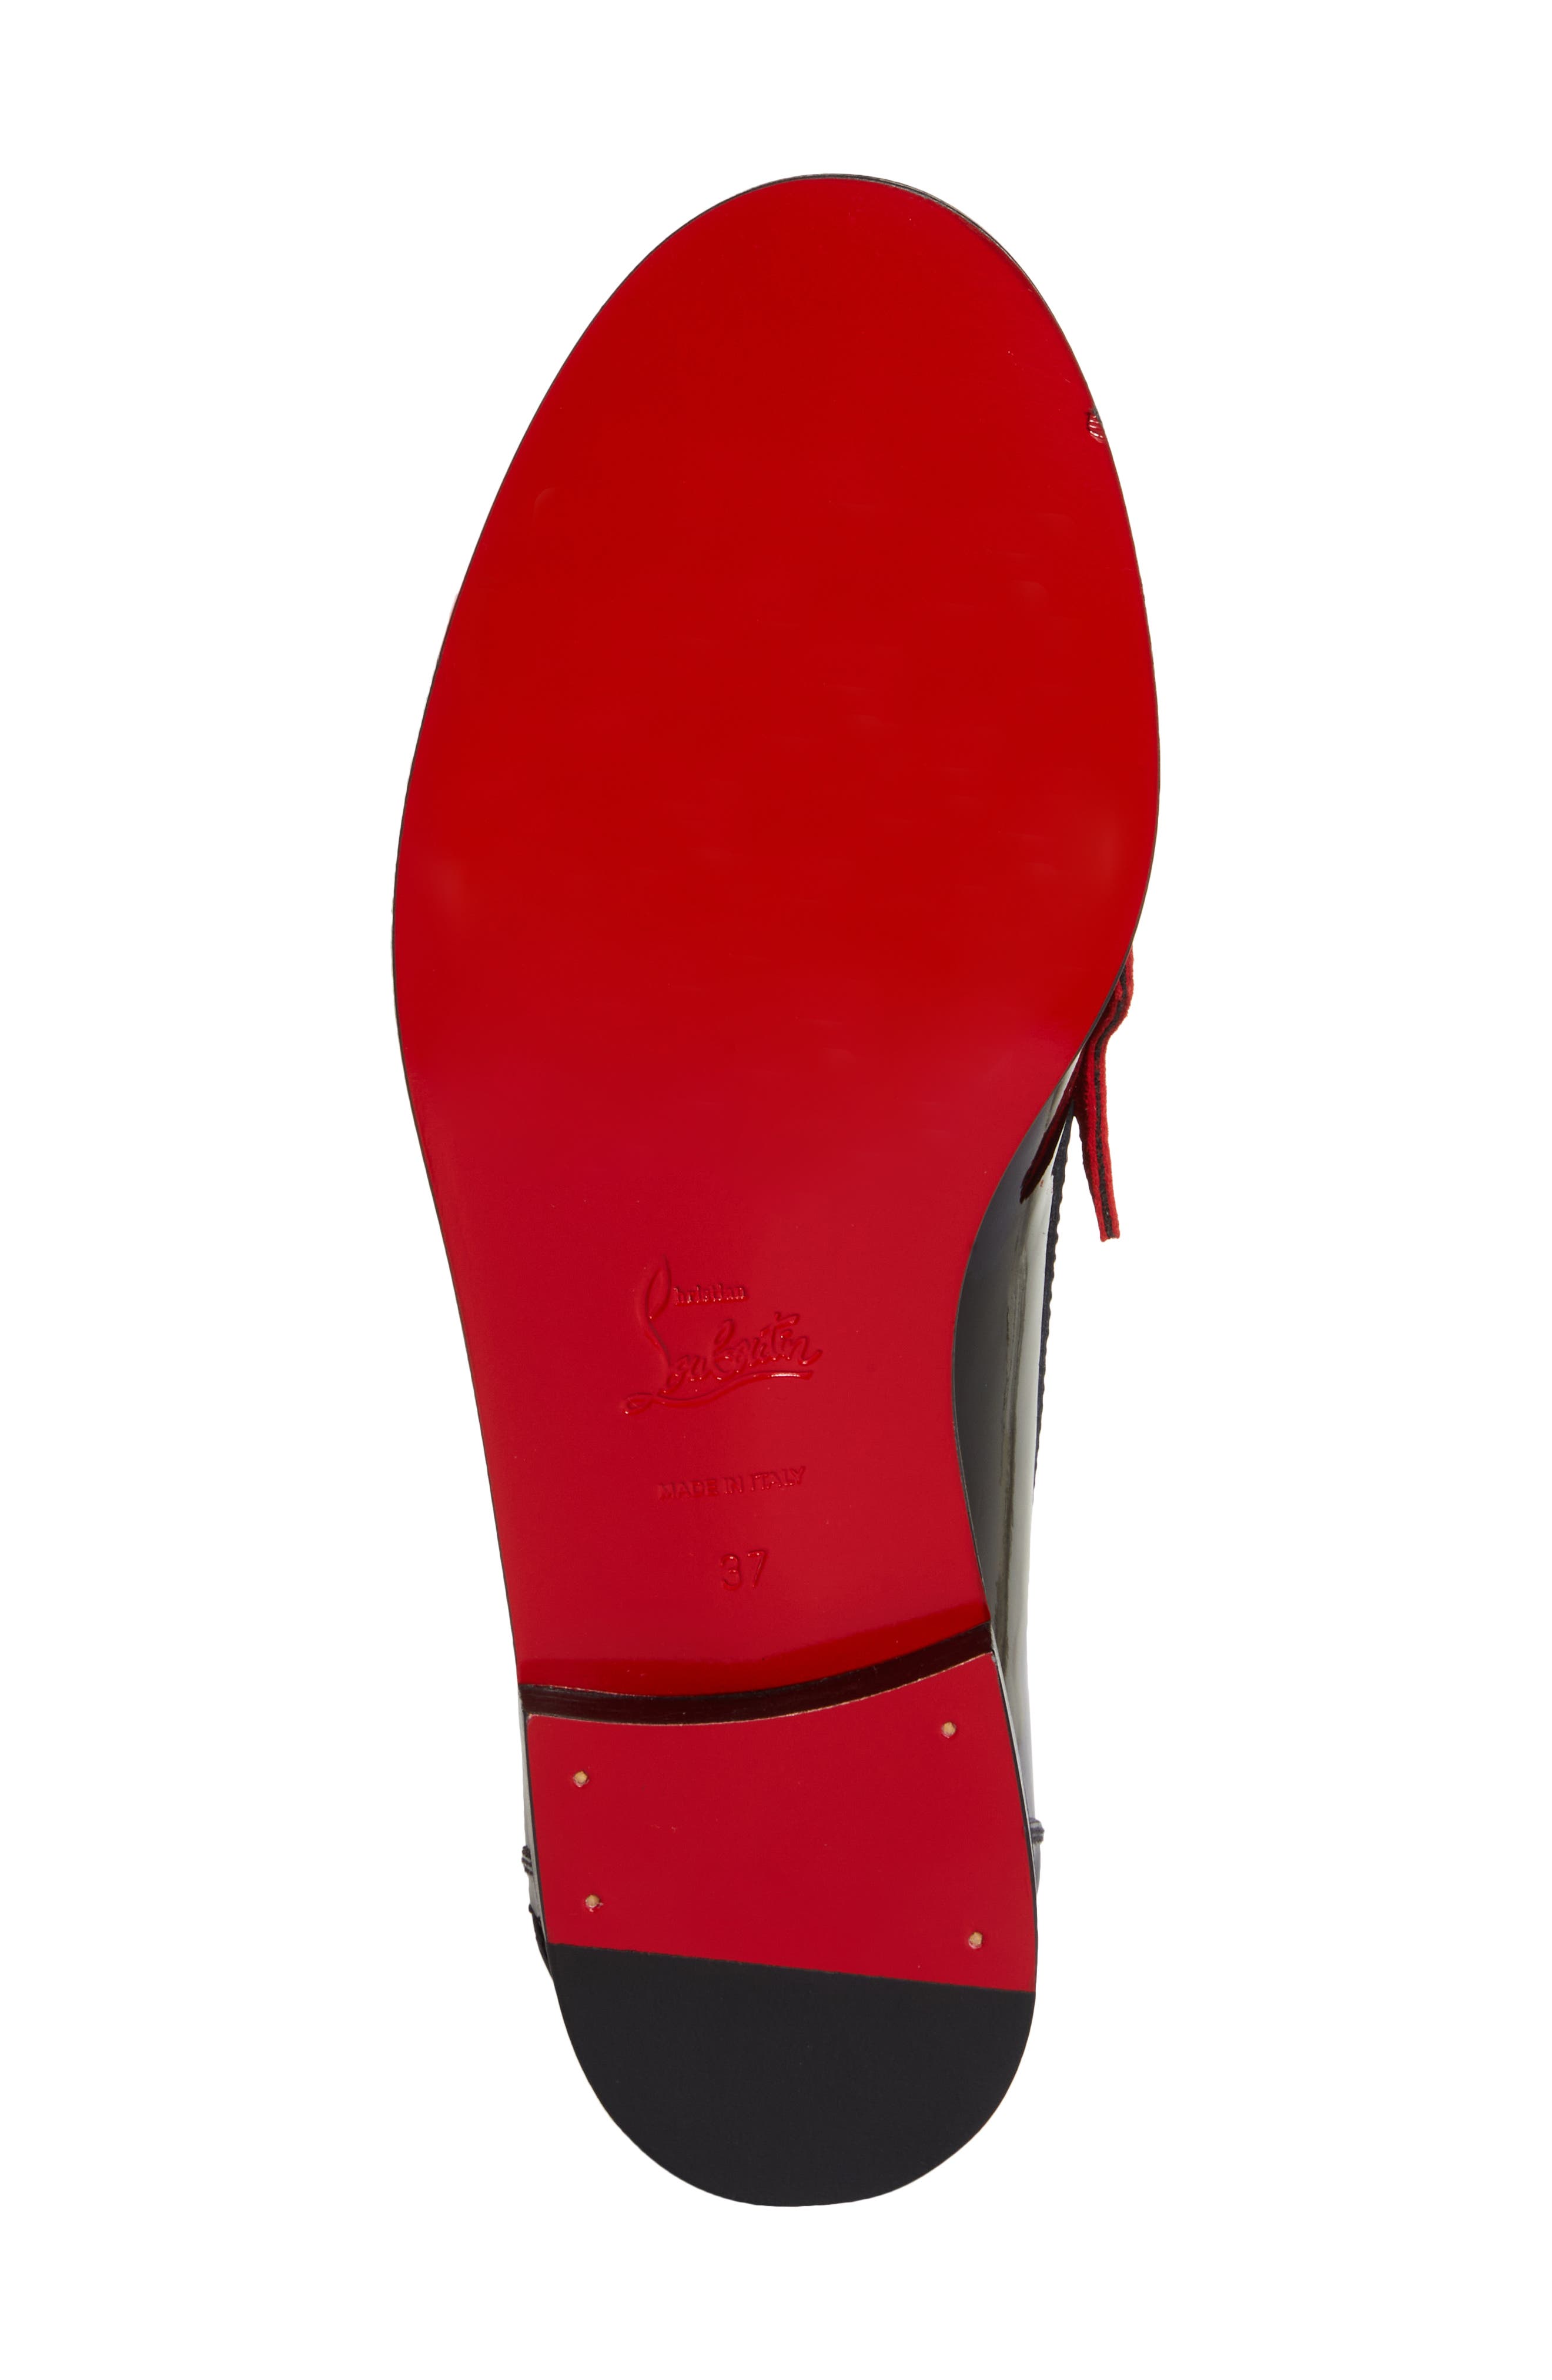 Christian Louboutin Pumppie Round Toe Mary Jane Pump in Ole Red at Nordstrom, Size 6.5Us